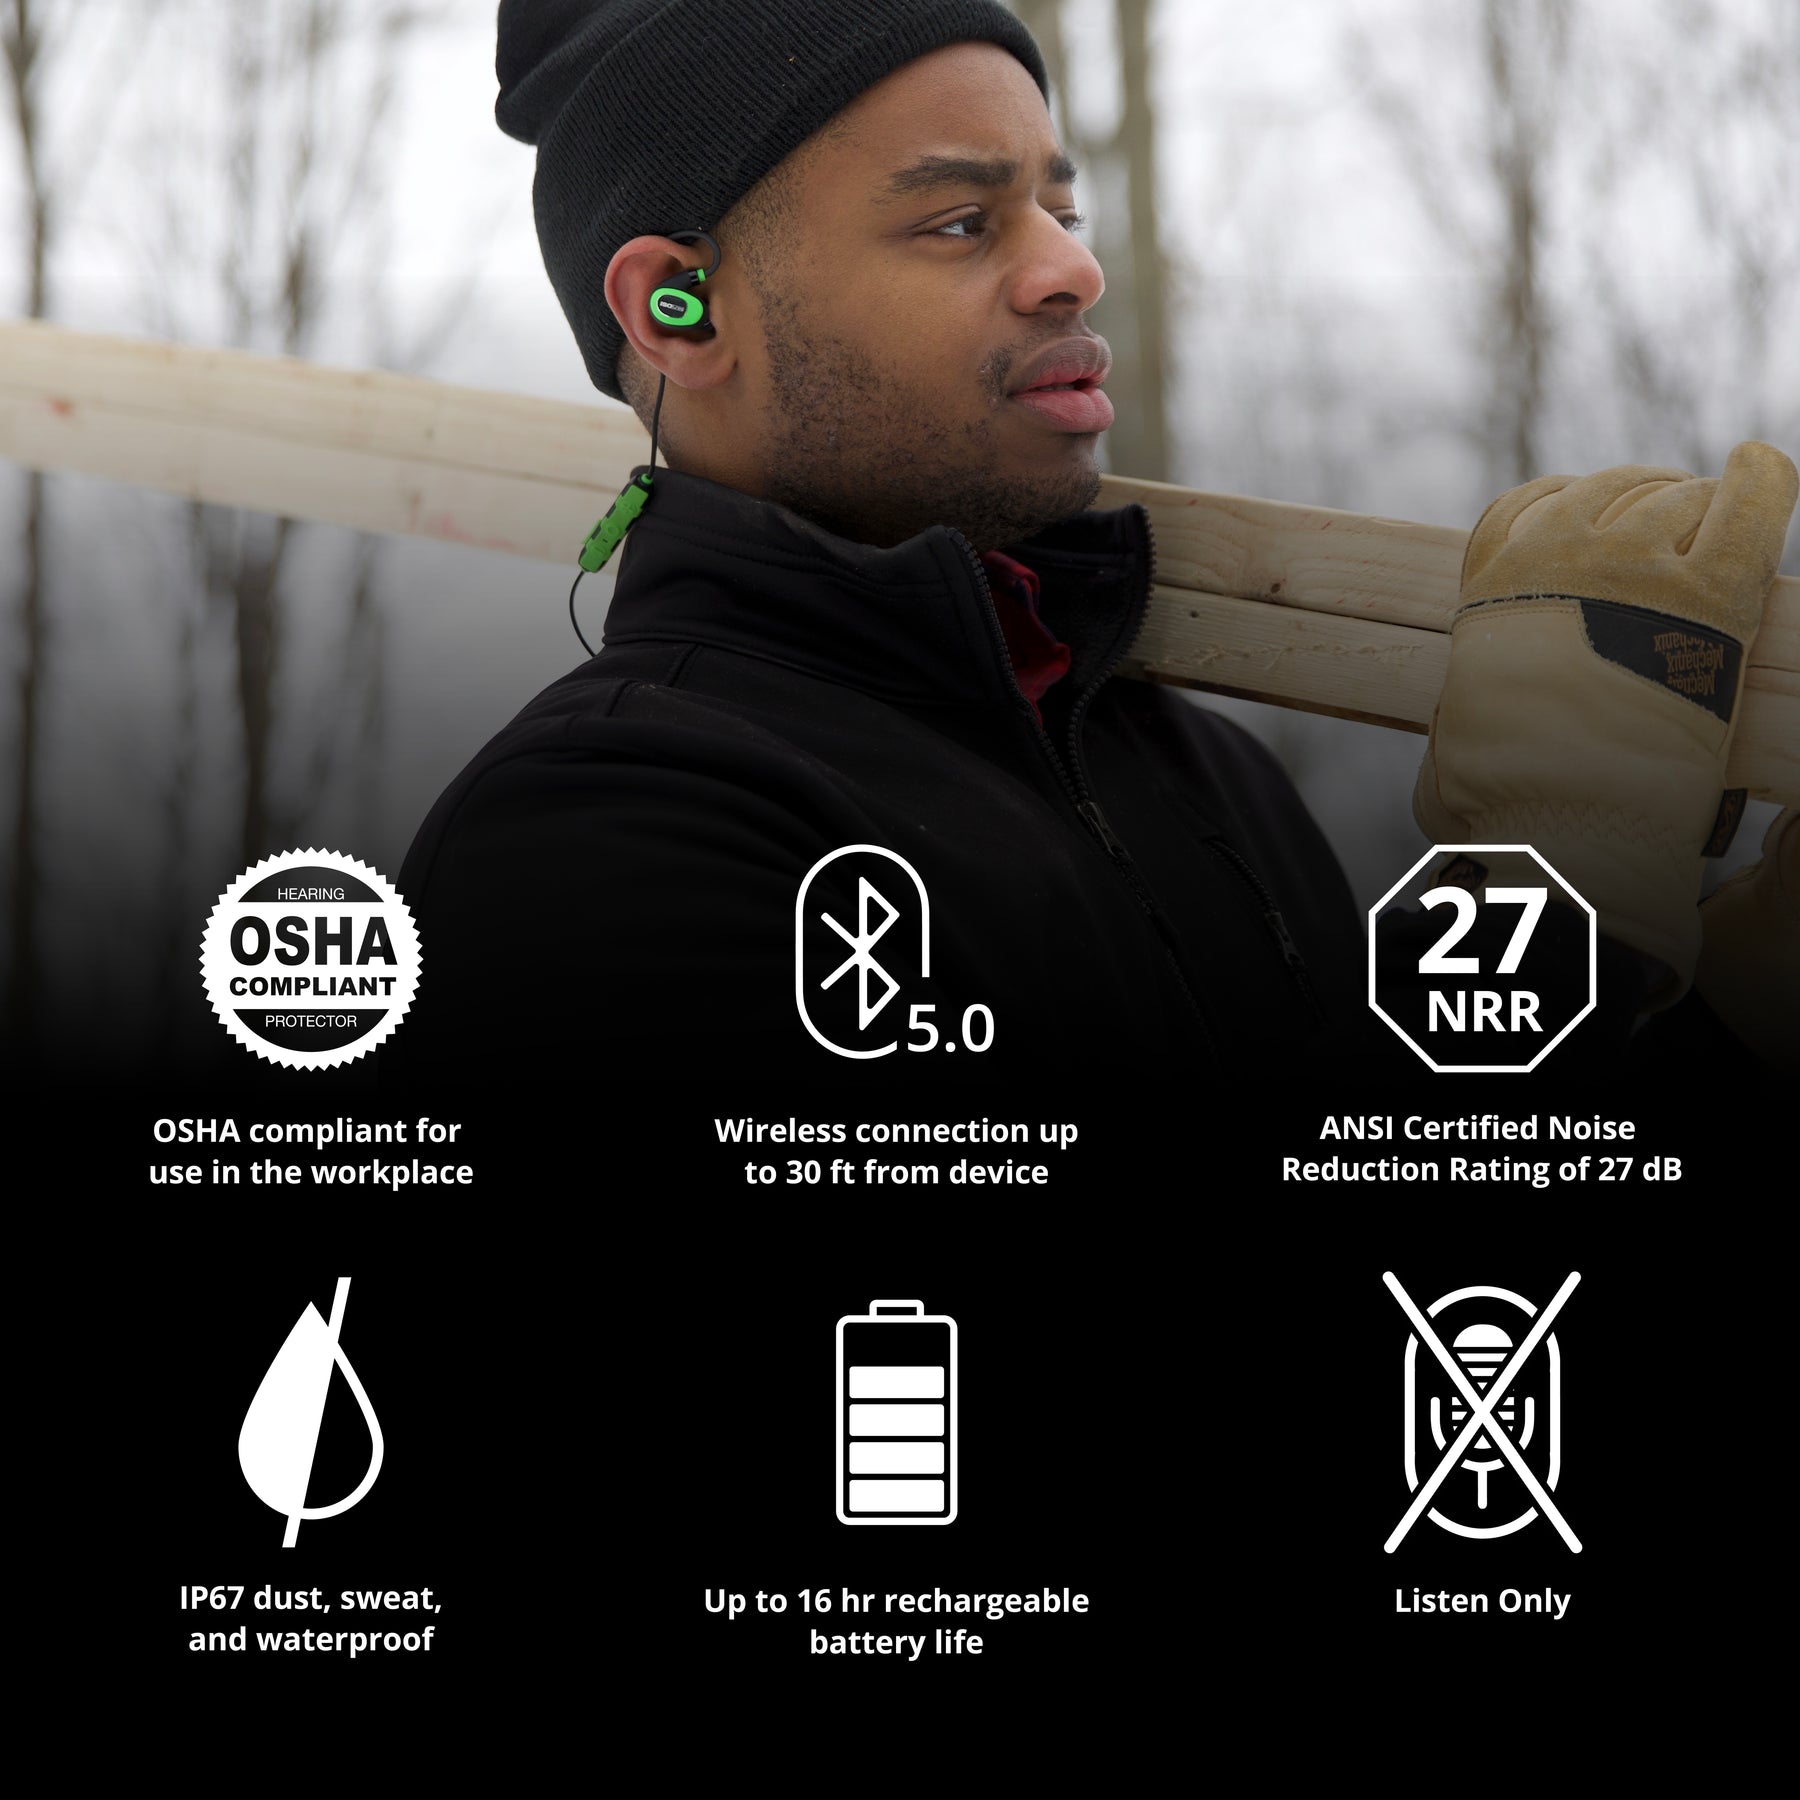 ISOtunes PRO 2 Industrial Listen Only Hearing Protection Earbuds Features Highlights